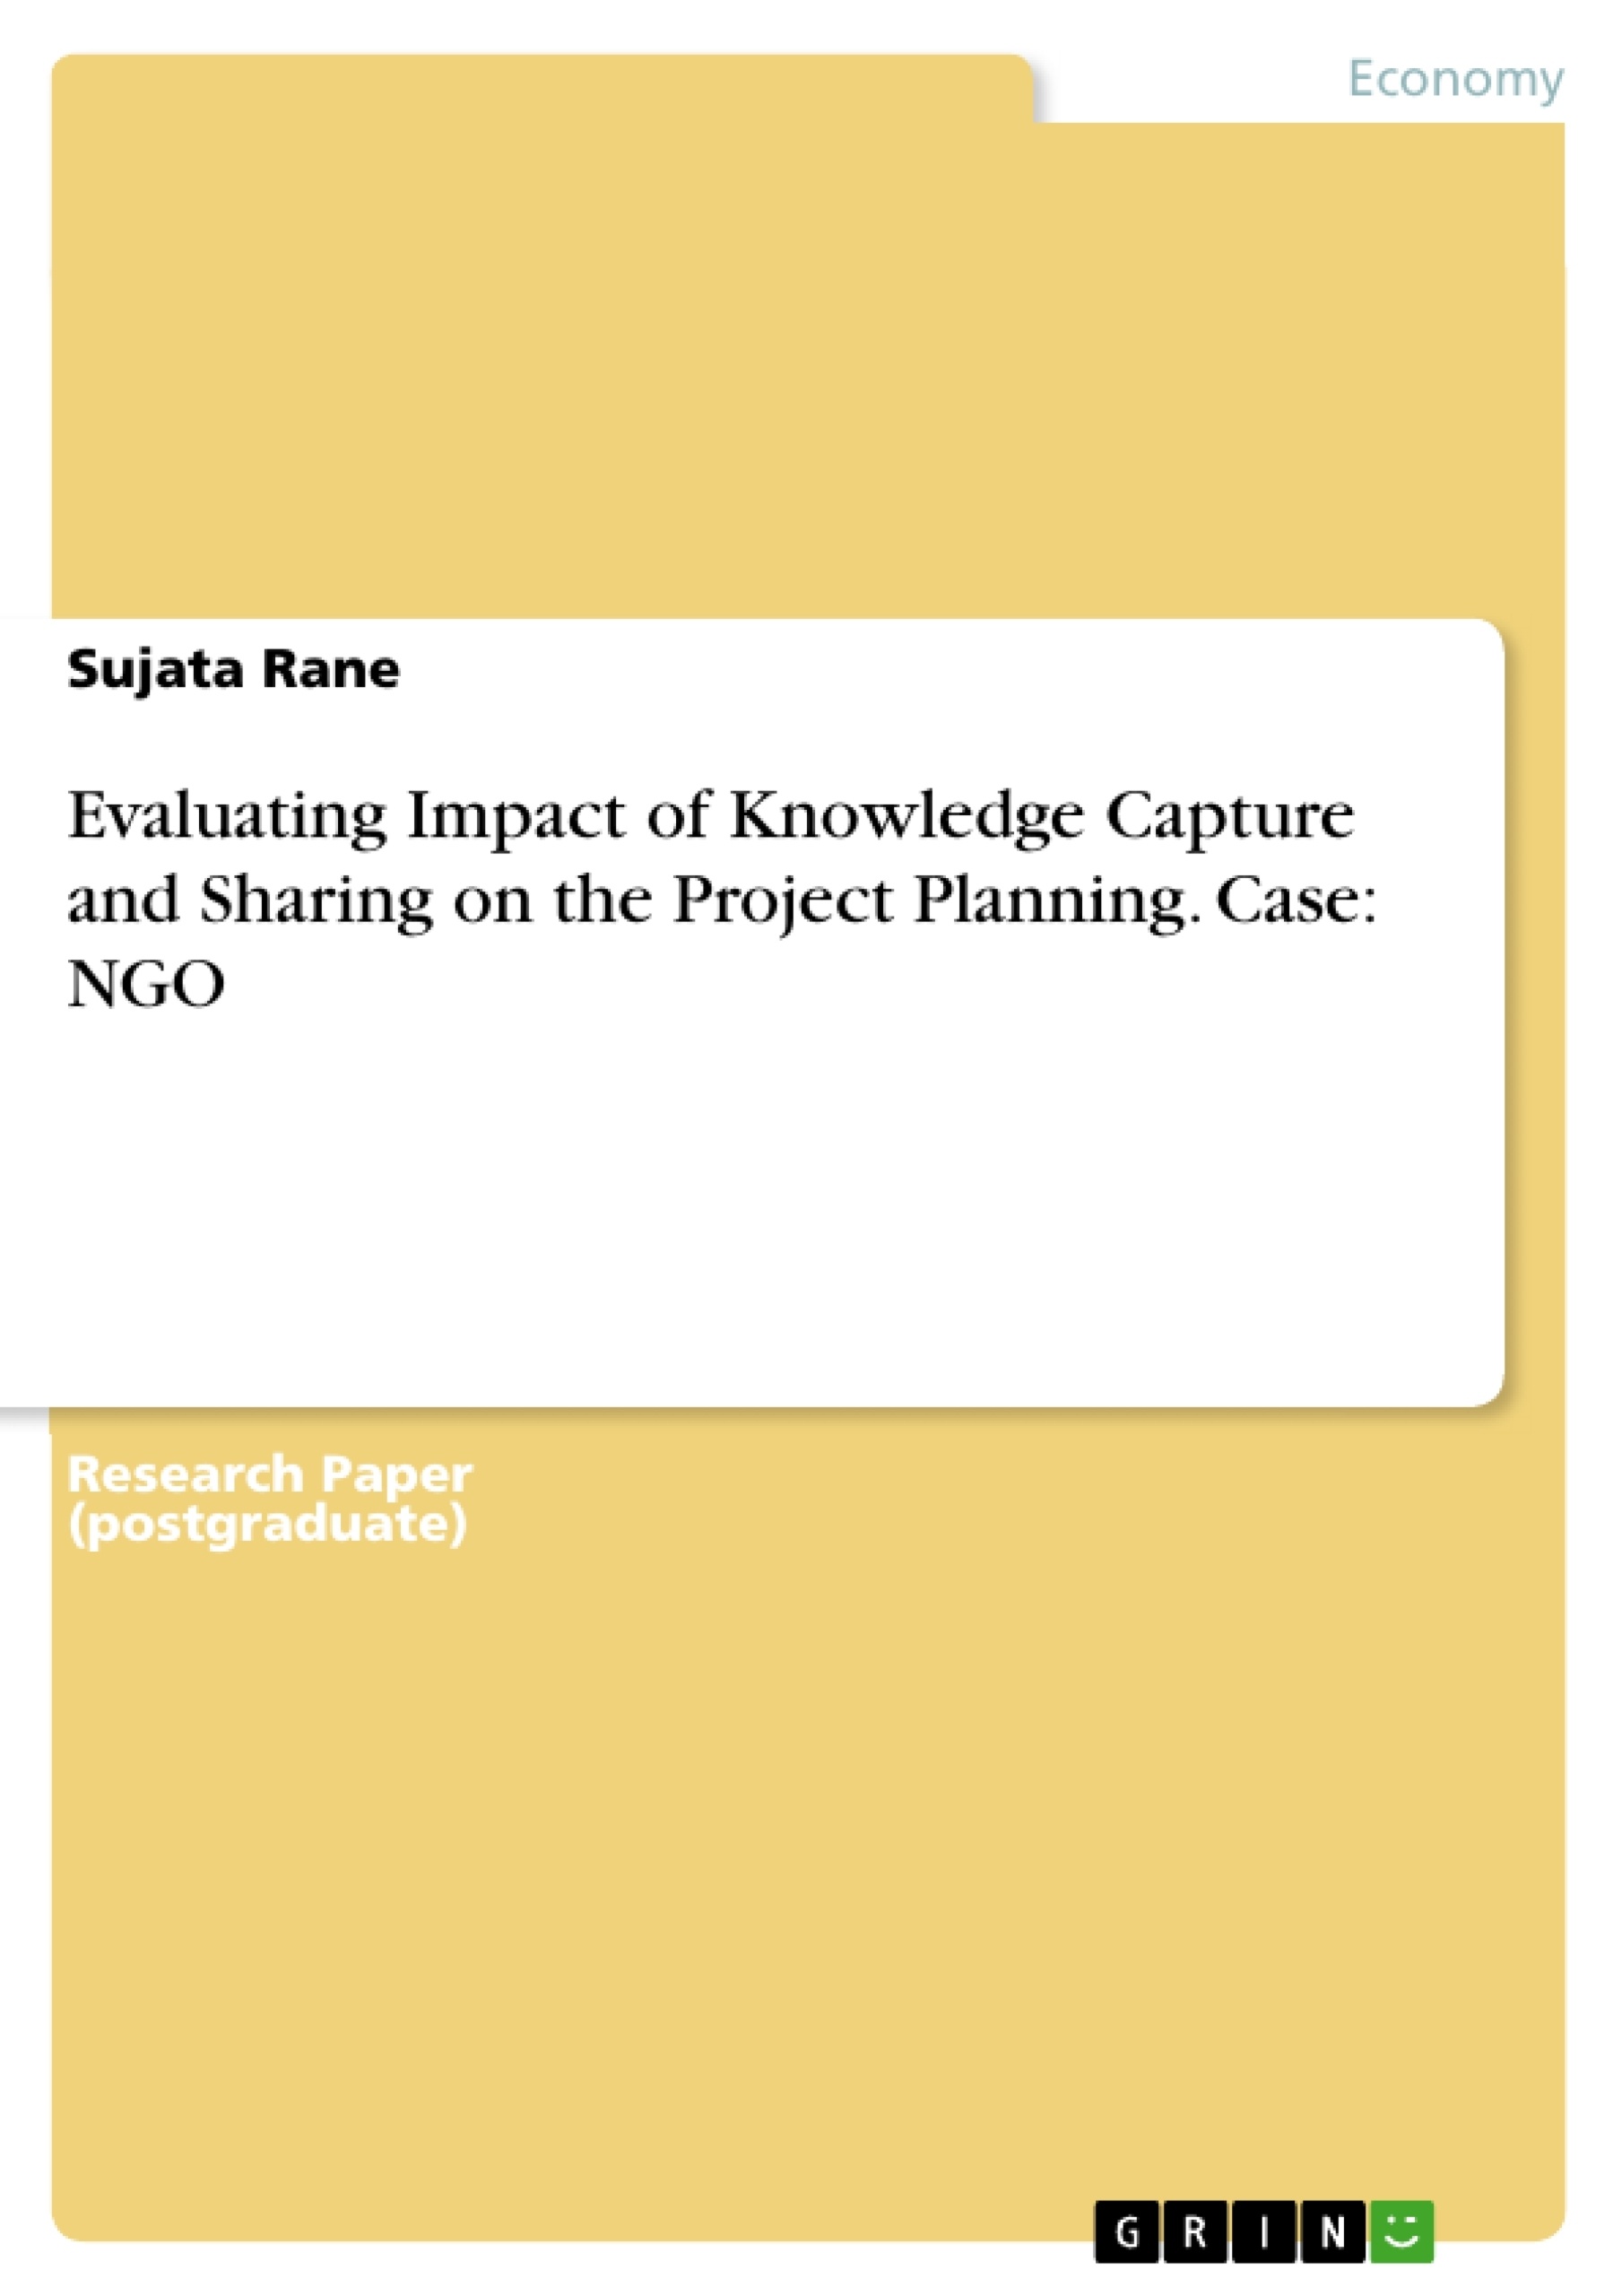 Title: Evaluating Impact of Knowledge Capture and Sharing on the Project Planning. Case: NGO